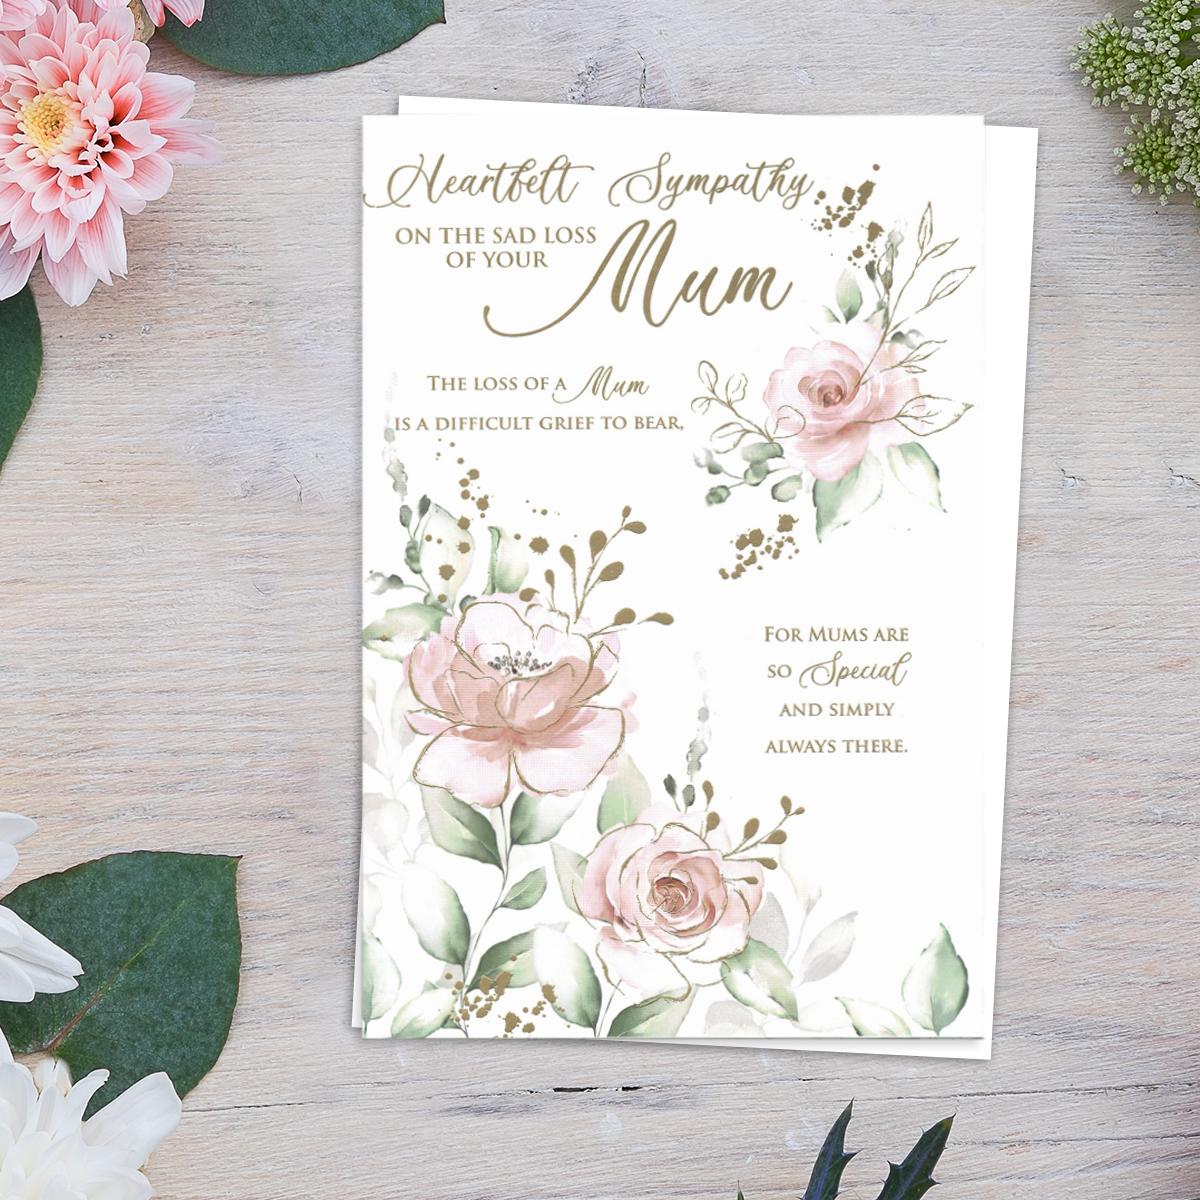 Heartfelt Sympathy On The Sad Loss Of Your Mum Card Front Image